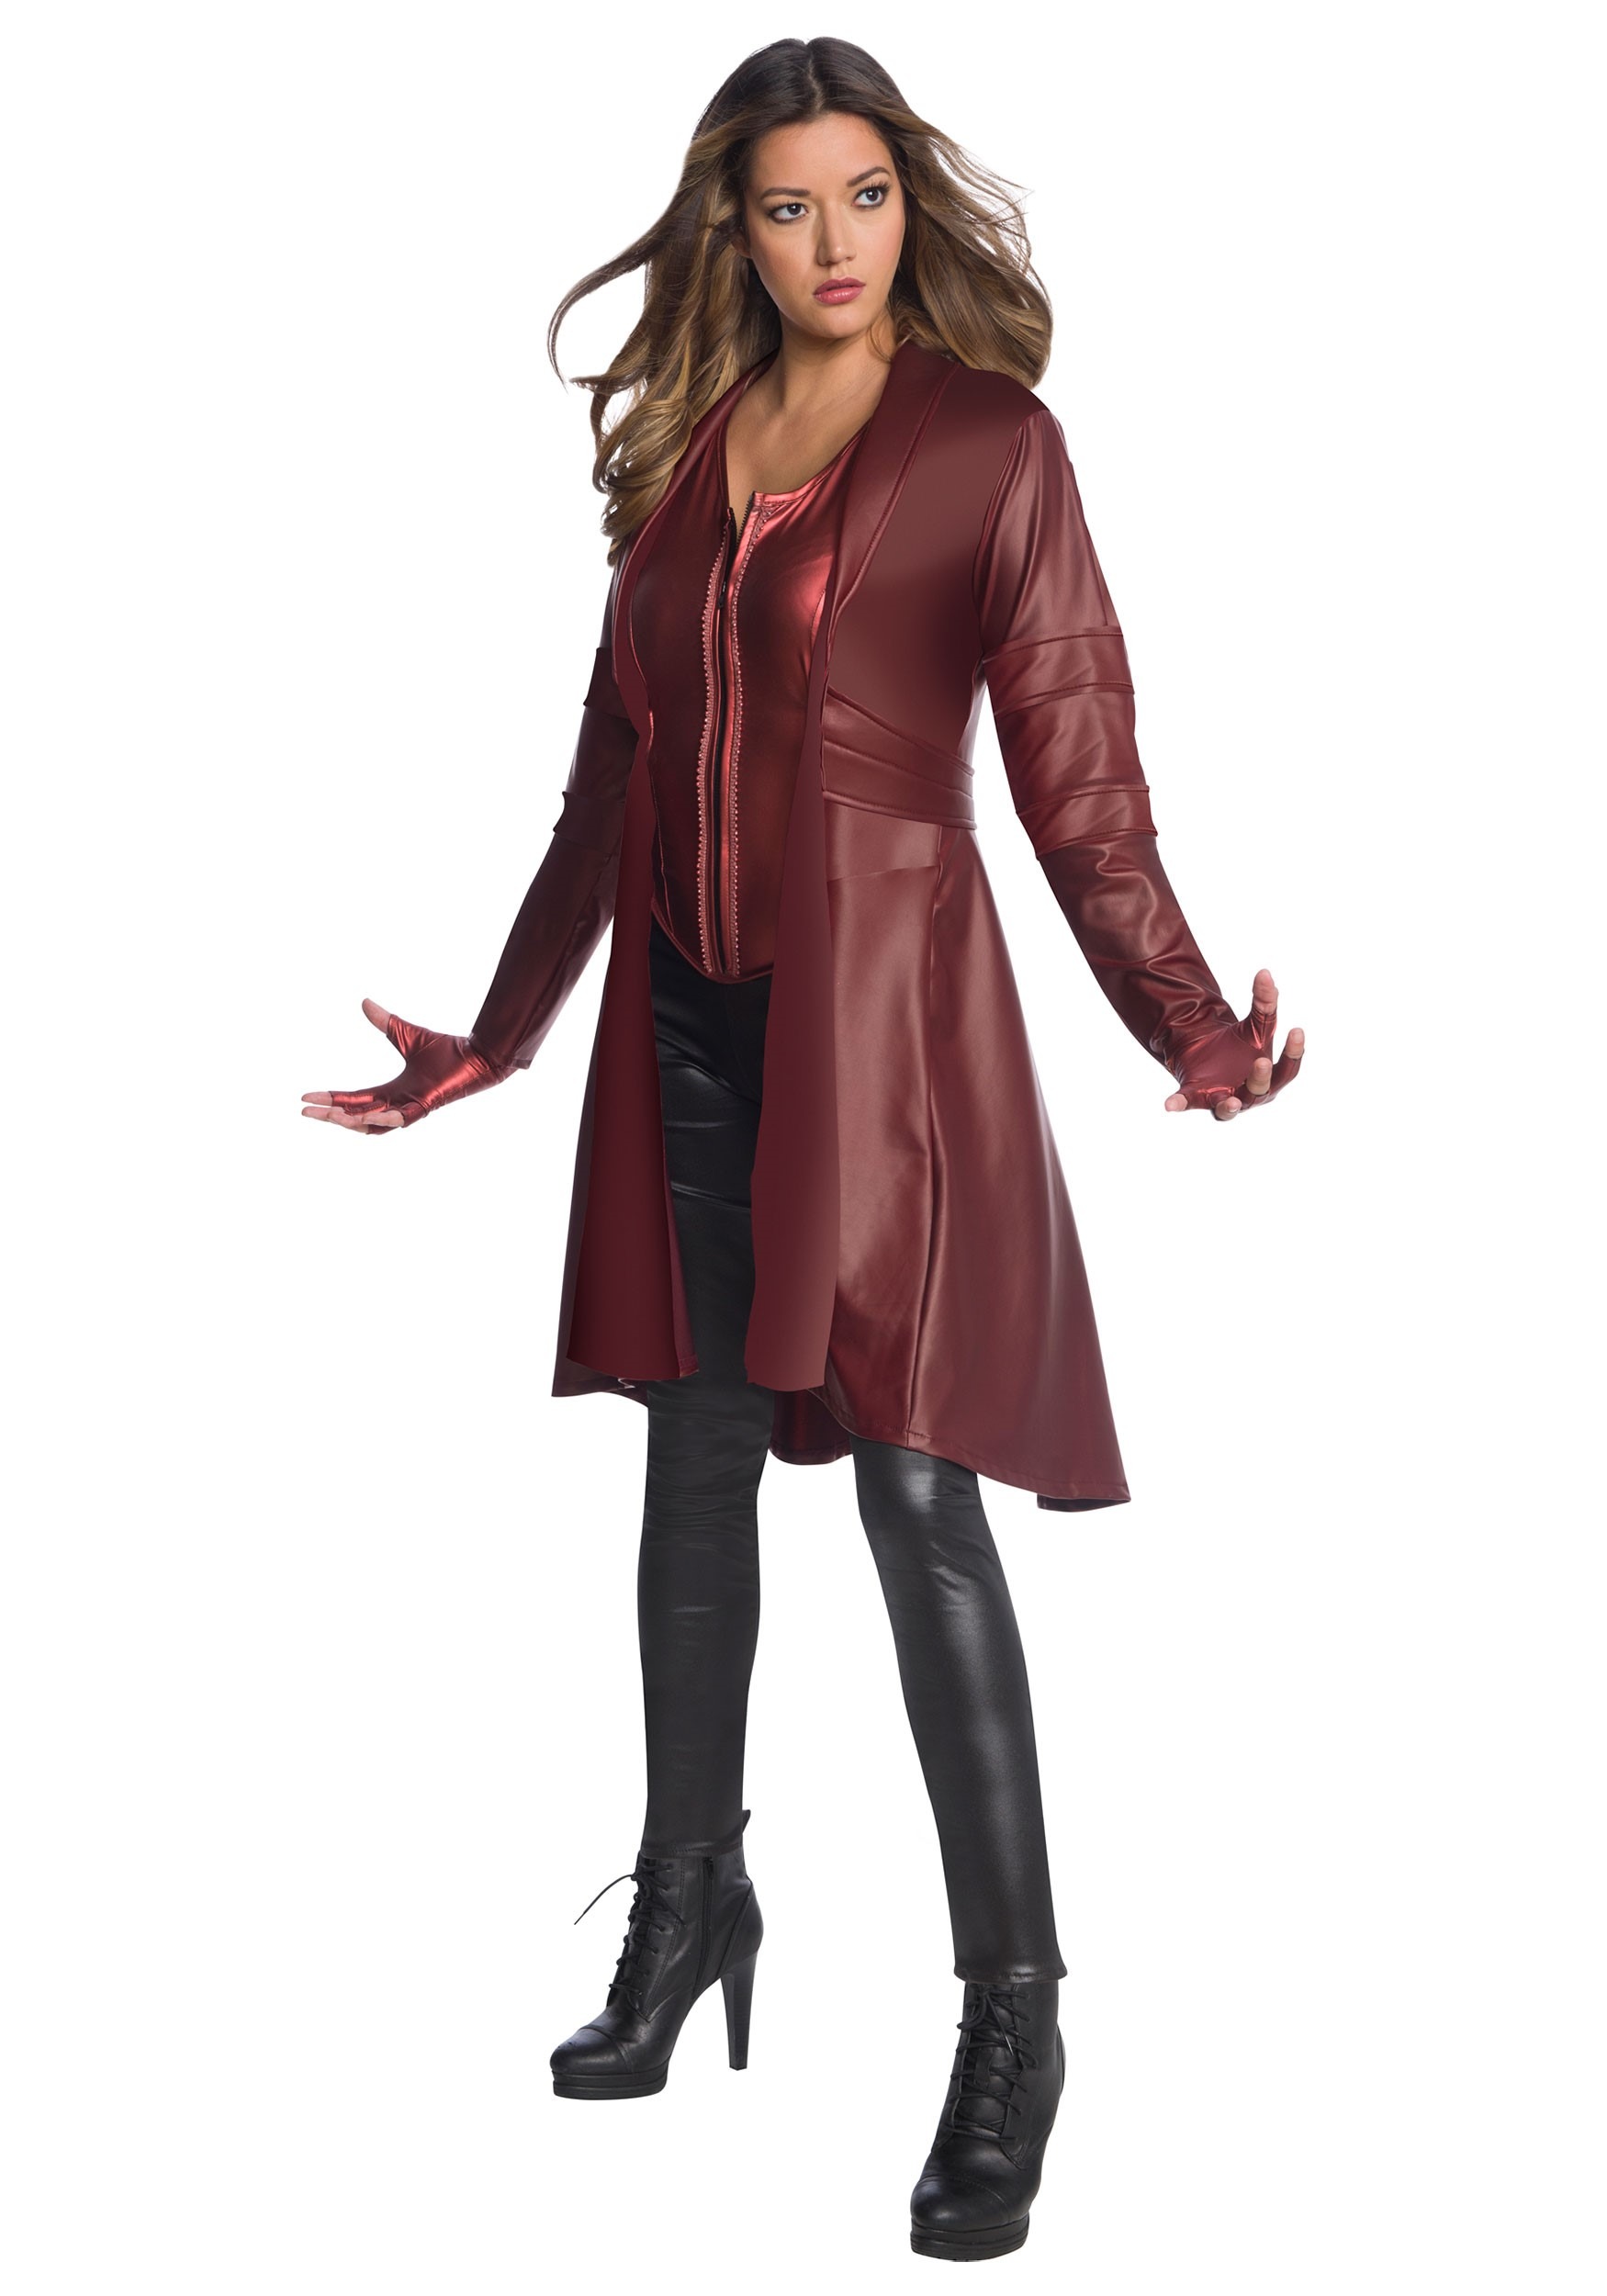 Women's Avengers Endgame Scarlet Witch Secret Wishes Costume